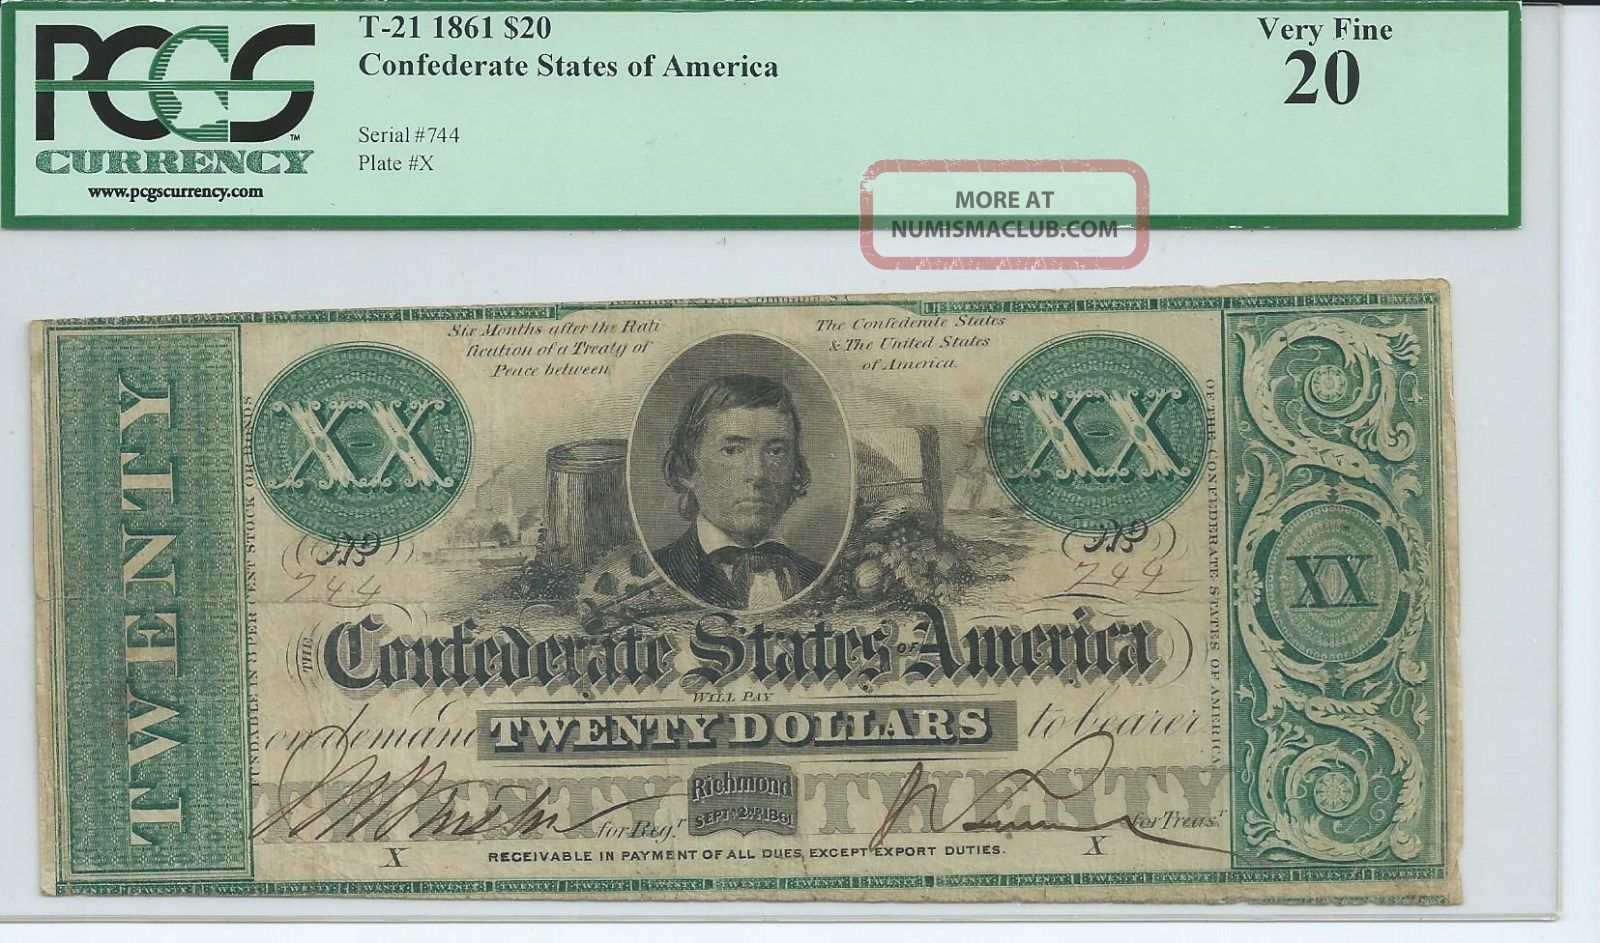 Confederate 150 Years Old Csa Currency T21 $20 Bank Note Not Cut Cancelled 744 Paper Money: US photo